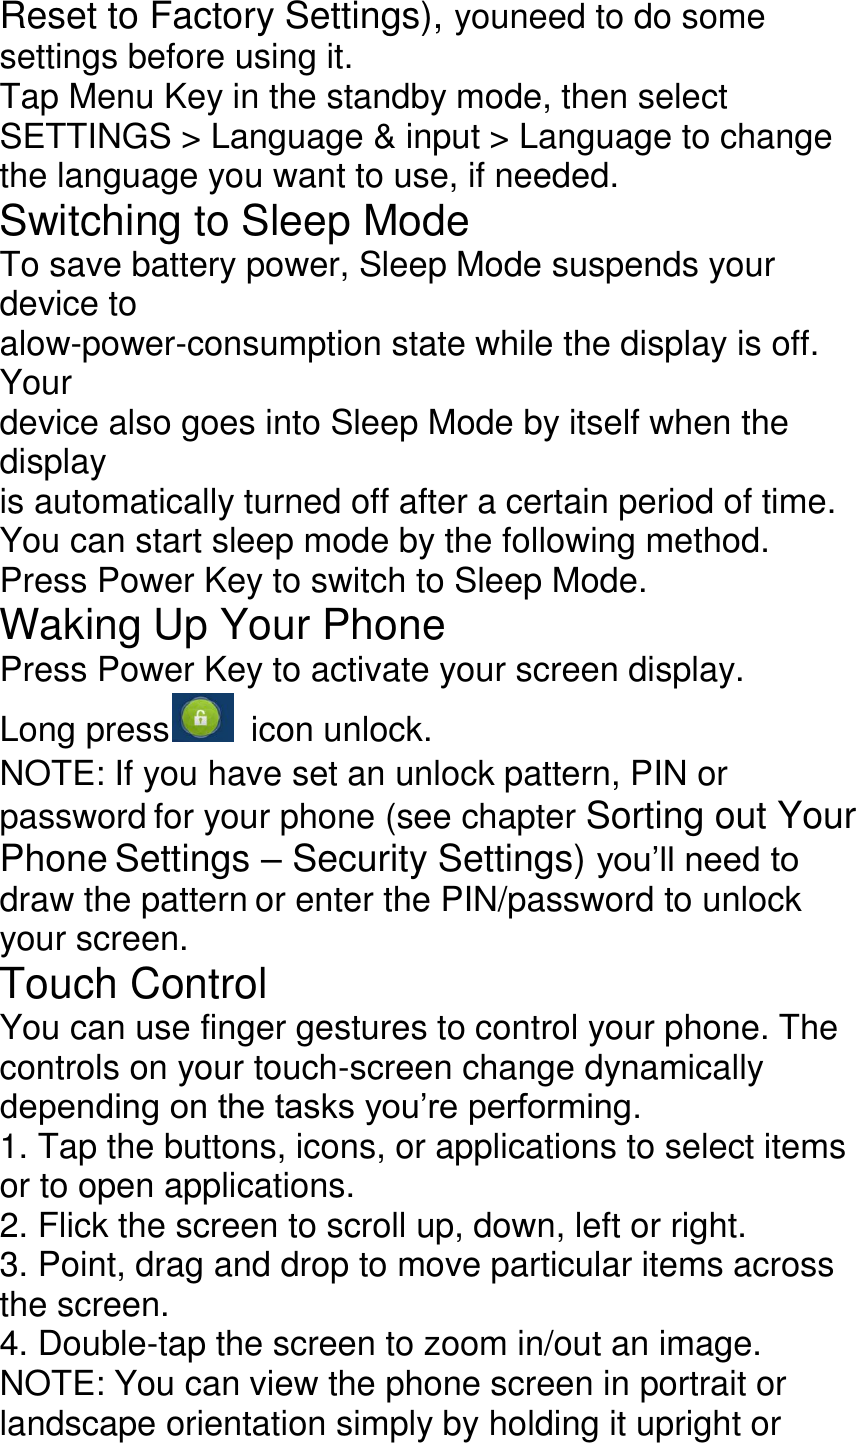 Reset to Factory Settings), youneed to do some settings before using it. Tap Menu Key in the standby mode, then select SETTINGS &gt; Language &amp; input &gt; Language to change the language you want to use, if needed. Switching to Sleep Mode To save battery power, Sleep Mode suspends your device to alow-power-consumption state while the display is off. Your device also goes into Sleep Mode by itself when the display is automatically turned off after a certain period of time. You can start sleep mode by the following method. Press Power Key to switch to Sleep Mode. Waking Up Your Phone Press Power Key to activate your screen display. Long press   icon unlock. NOTE: If you have set an unlock pattern, PIN or password for your phone (see chapter Sorting out Your Phone Settings – Security Settings) you’ll need to draw the pattern or enter the PIN/password to unlock your screen. Touch Control You can use finger gestures to control your phone. The controls on your touch-screen change dynamically depending on the tasks you’re performing. 1. Tap the buttons, icons, or applications to select items or to open applications. 2. Flick the screen to scroll up, down, left or right. 3. Point, drag and drop to move particular items across the screen. 4. Double-tap the screen to zoom in/out an image. NOTE: You can view the phone screen in portrait or landscape orientation simply by holding it upright or 